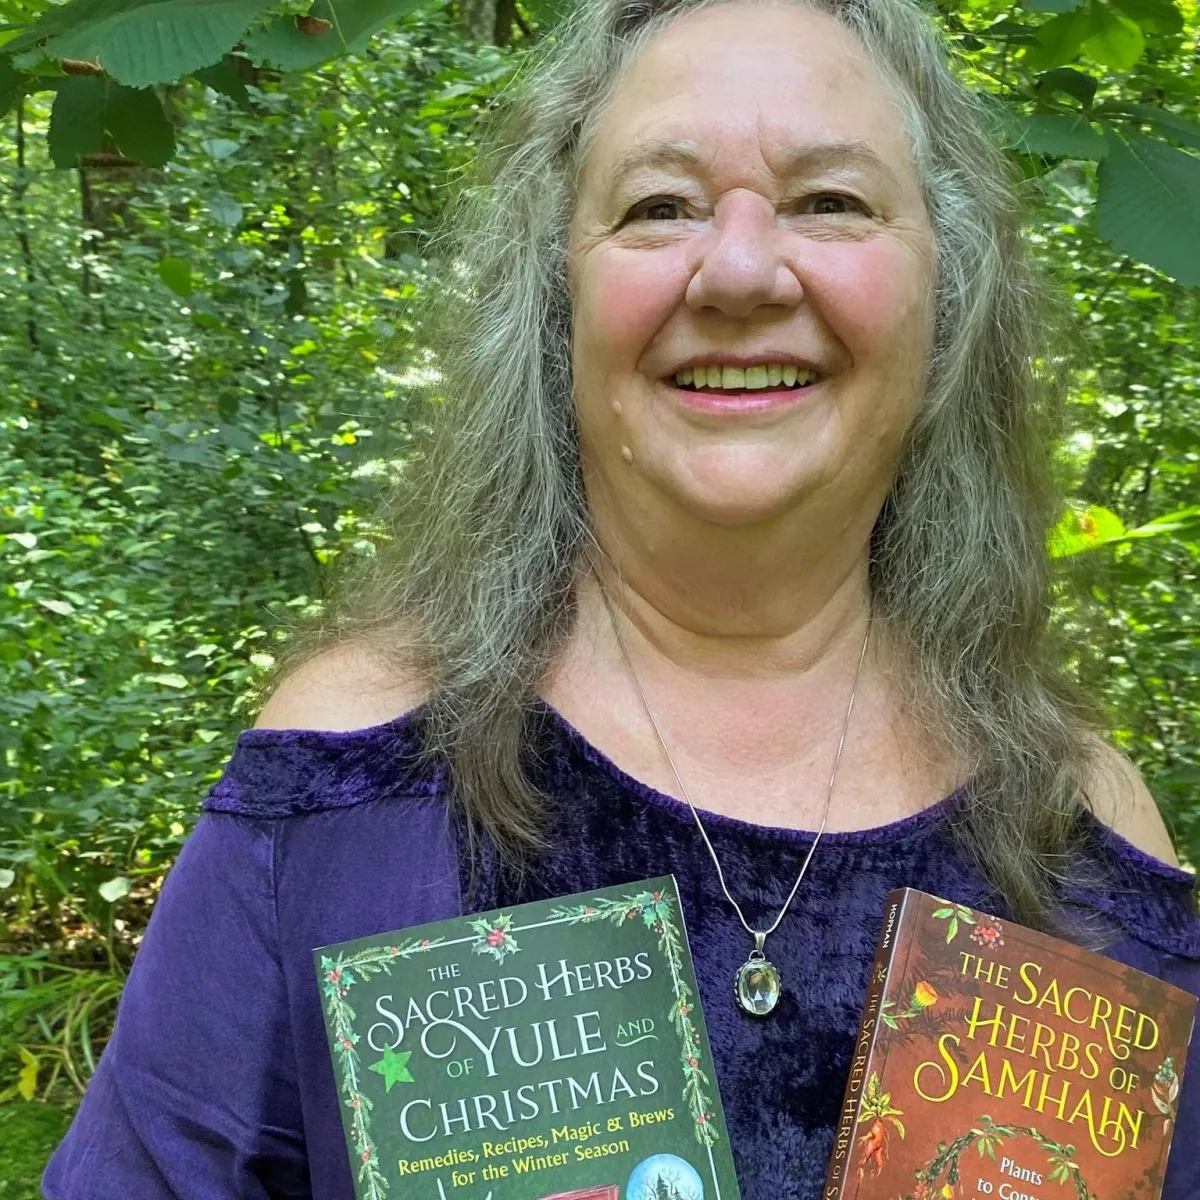 Ellen Evert Hopman with two of her books, The Sacred Herbs of Samhanin and The Sacred Herbs of Yule and Christmas